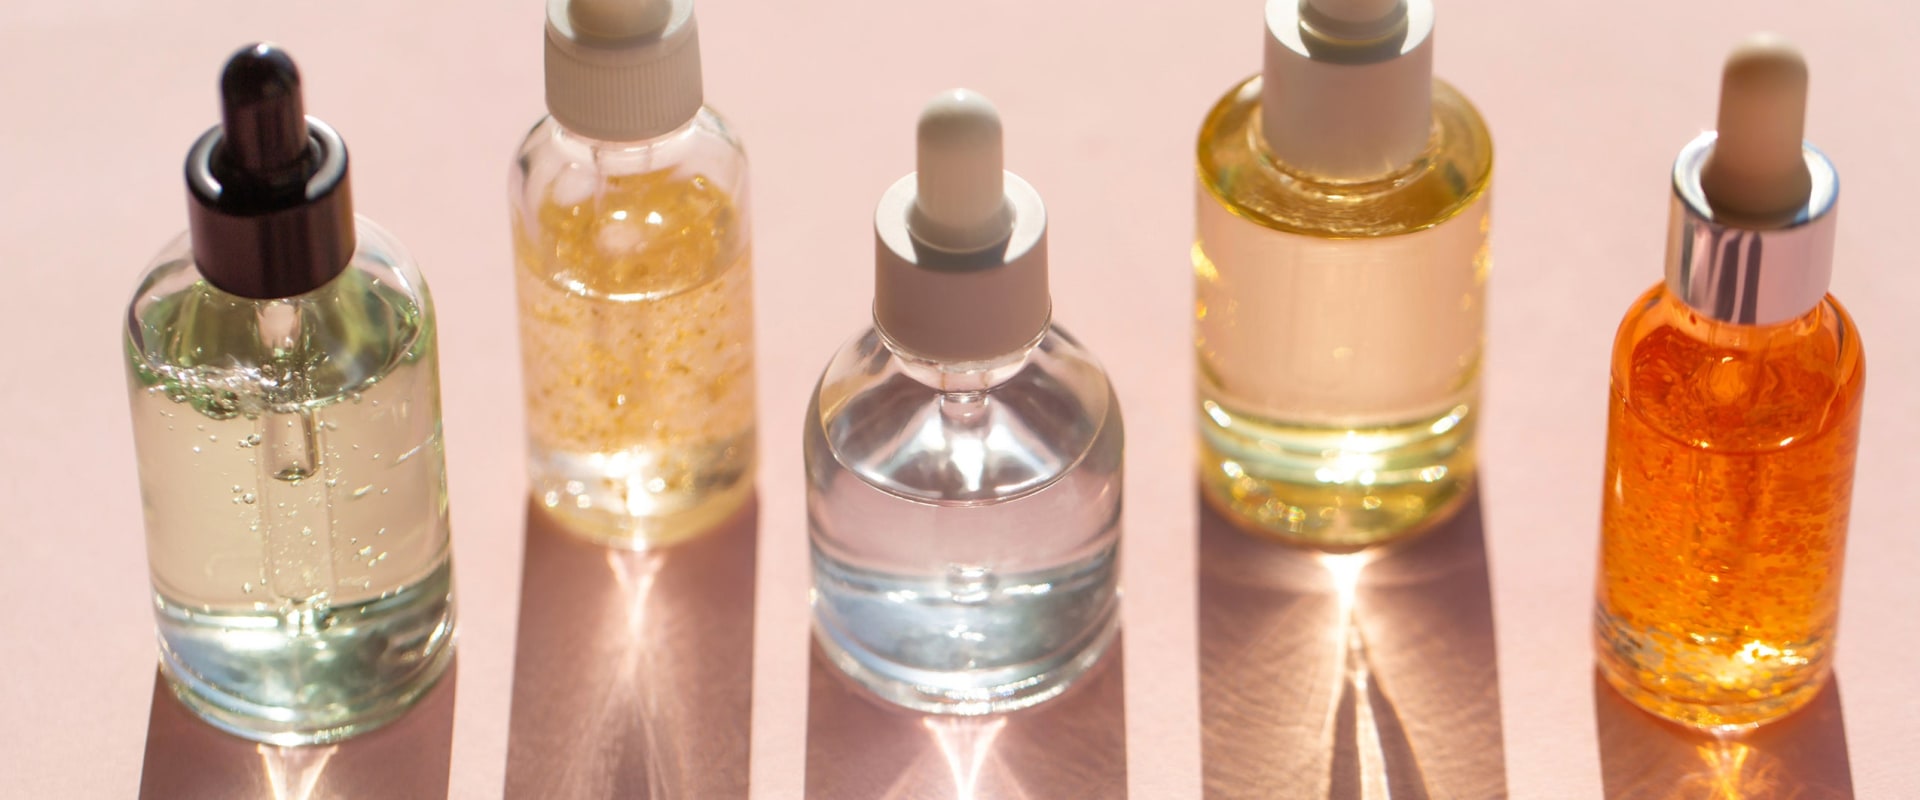 Buying Test Perfumes Online: What You Need to Know